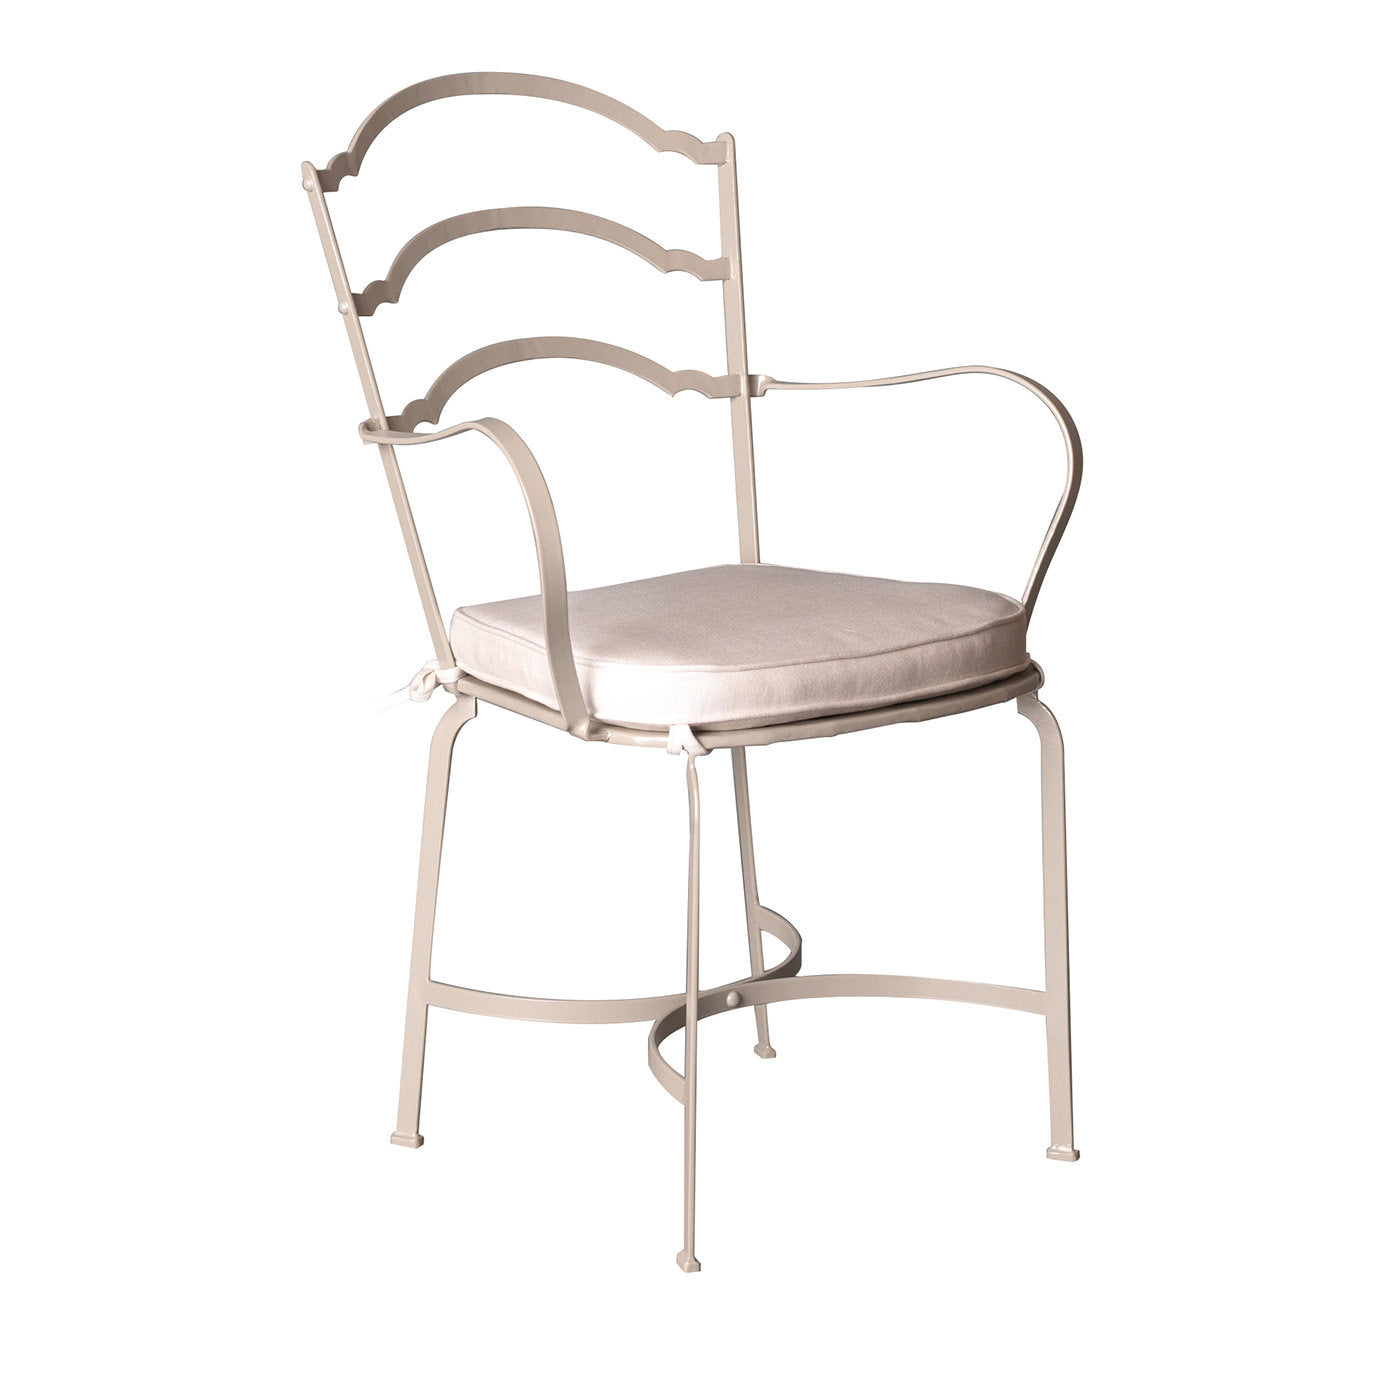 Archi Beige Chair in Stainless Steel - Main view